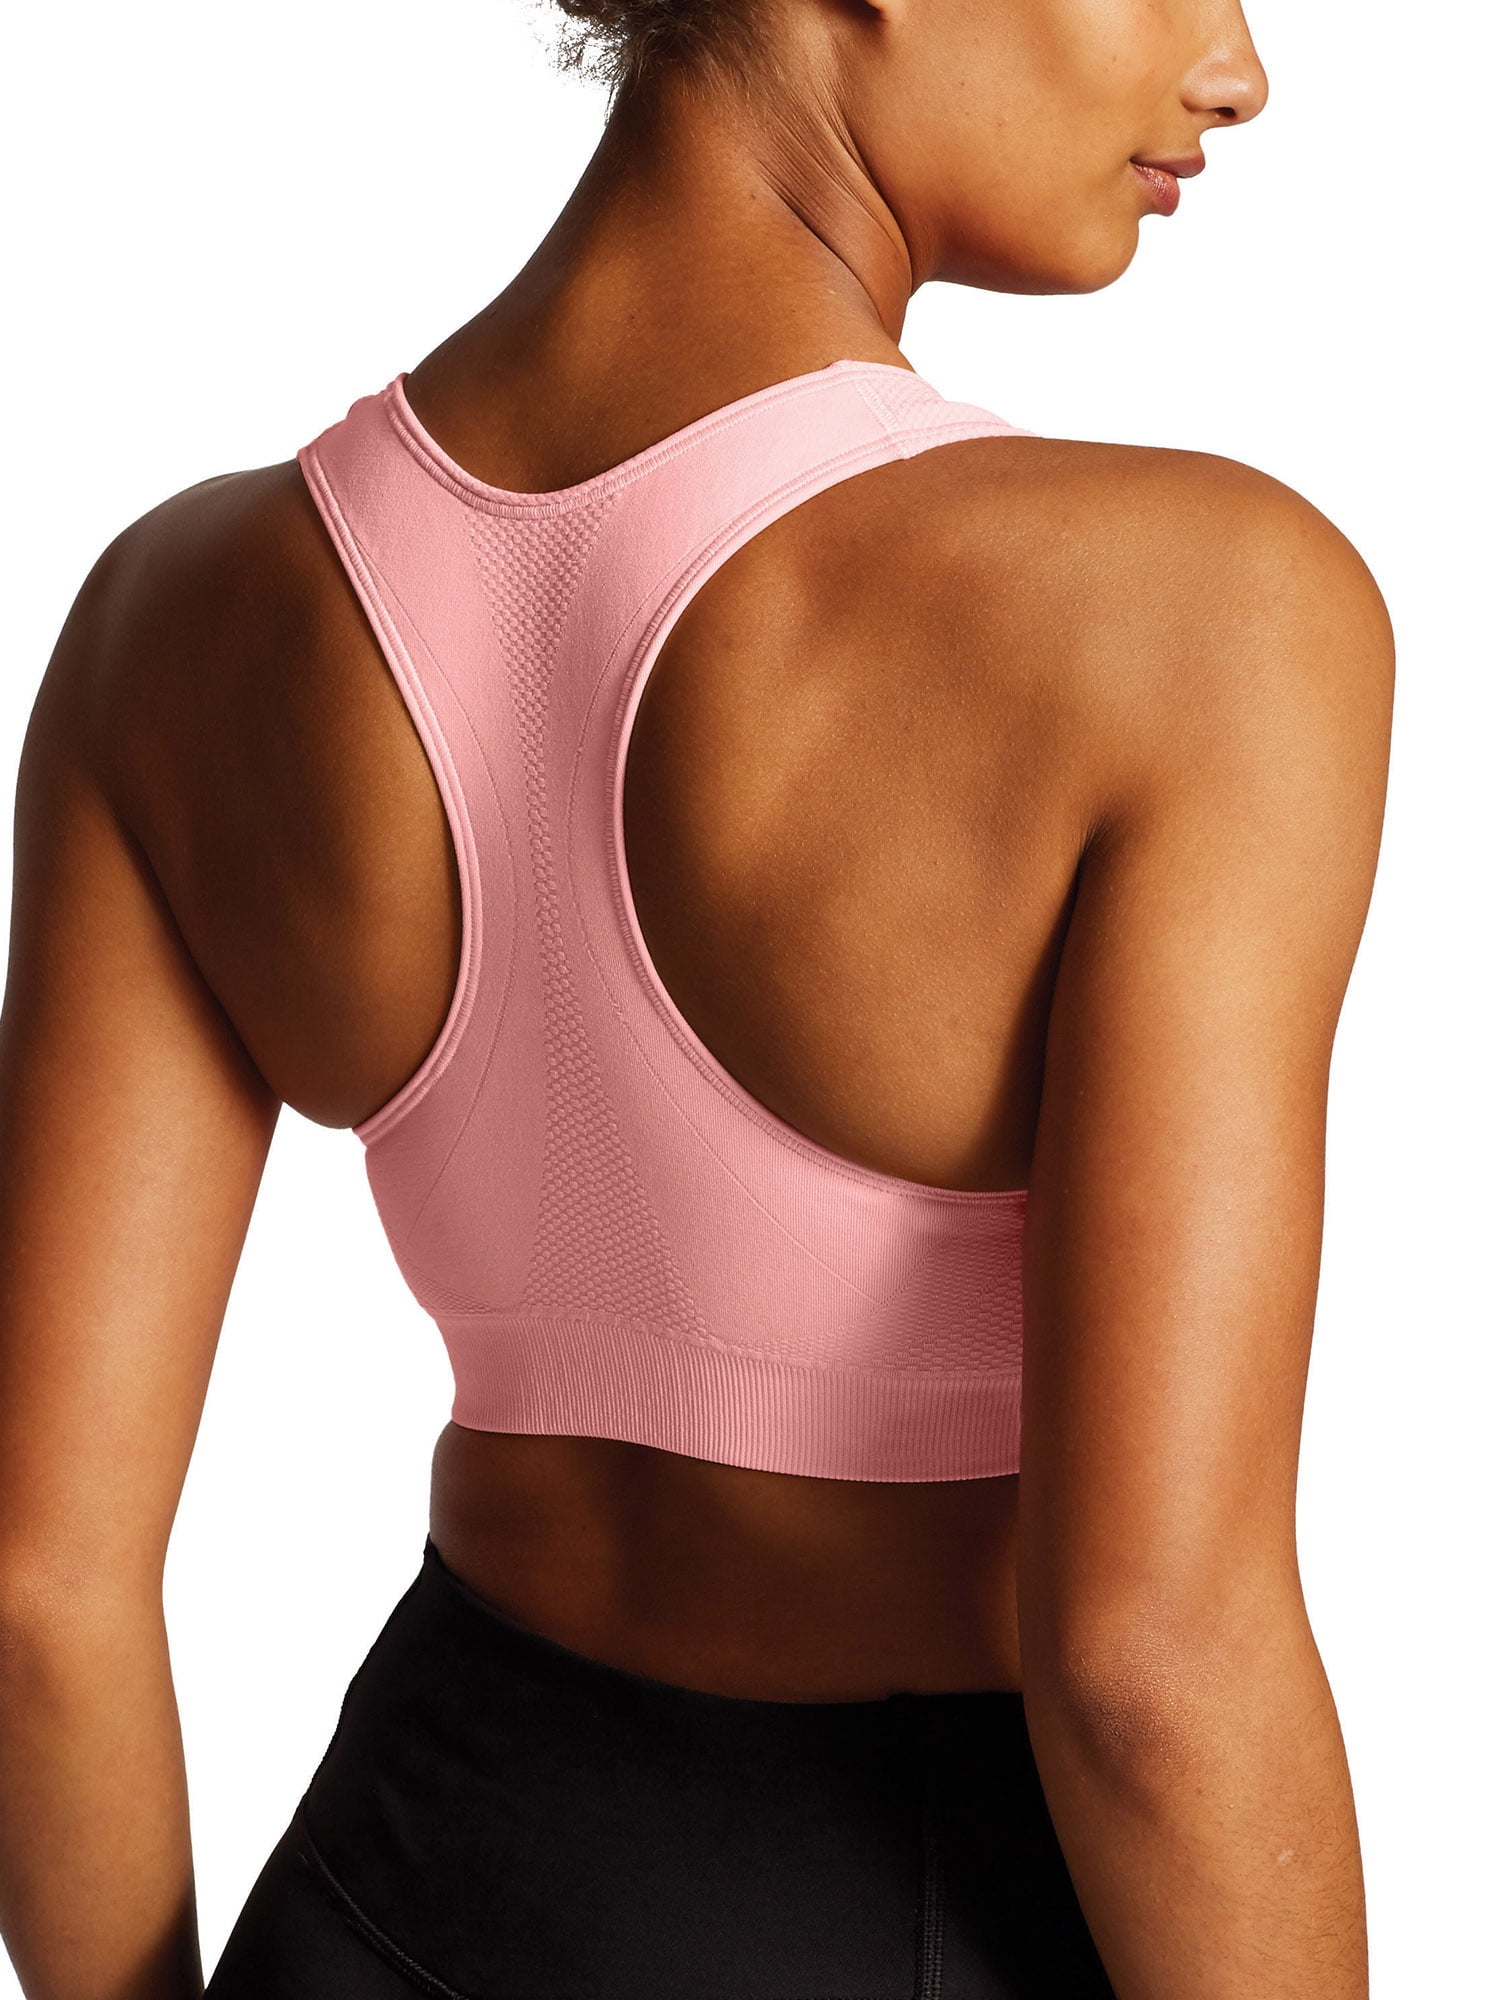 Champion Womens Infinity Racerback Sports Bra for Women, Moisture-Wicking Sports  Bra for Women, White, Large : Buy Online at Best Price in KSA - Souq is now  : Fashion